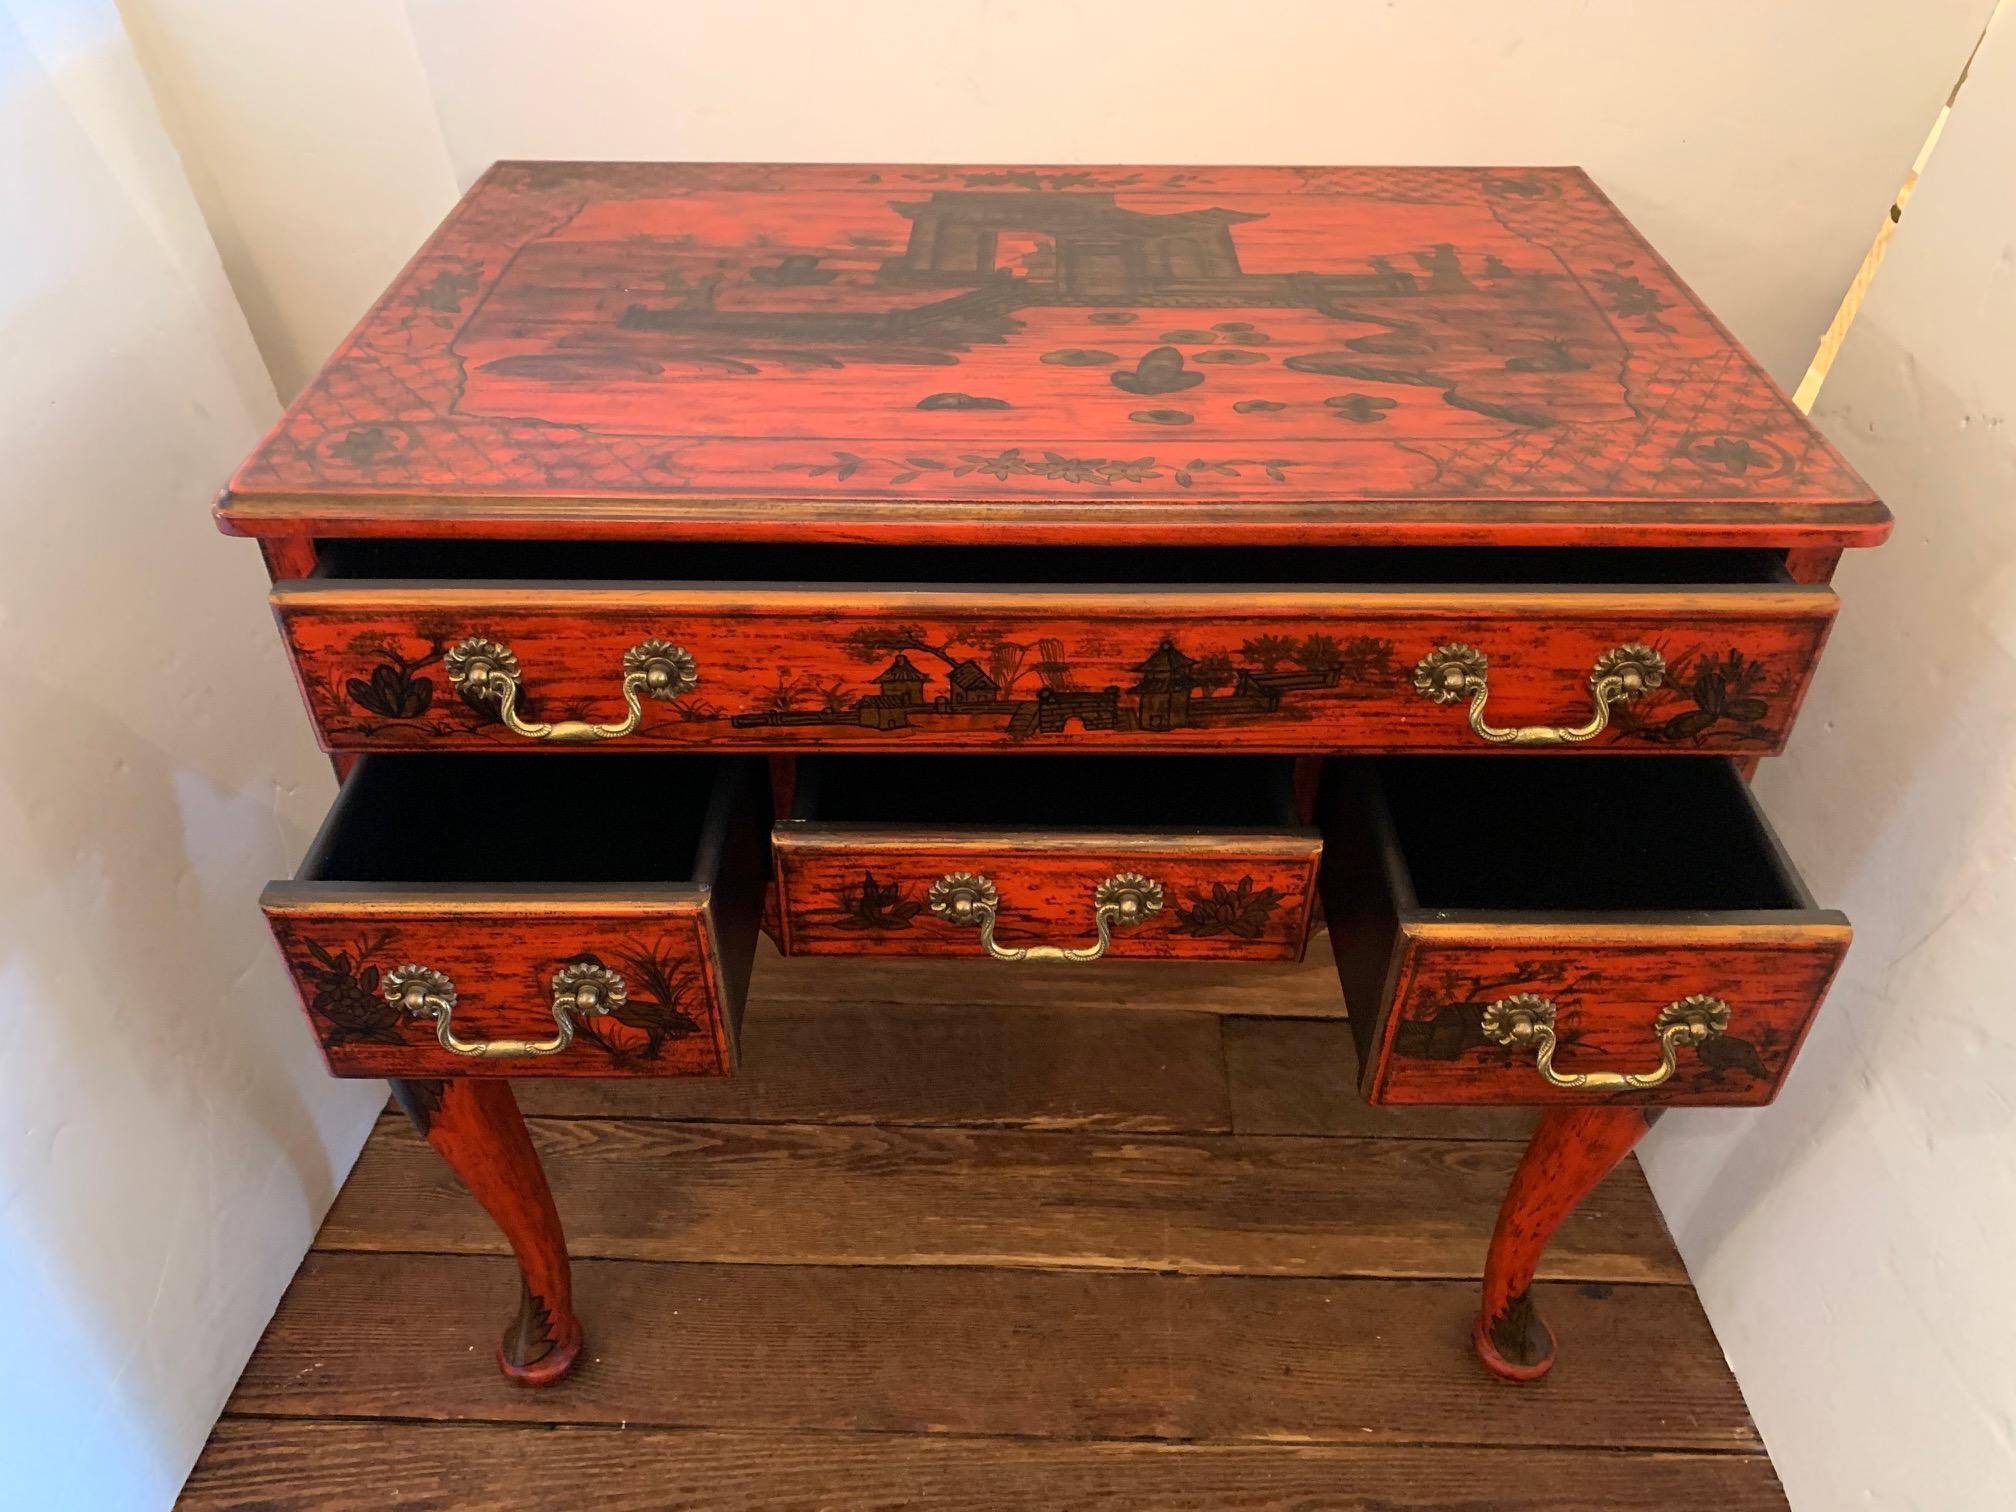 Chic tomato red, gold and black chinoiserie style console with drawers, having gorgeous antiqued finish and lovely pagodas, flowers and hatch work decoration. There is one long drawer over 3 smaller drawers with classic brass hardware and cabriole